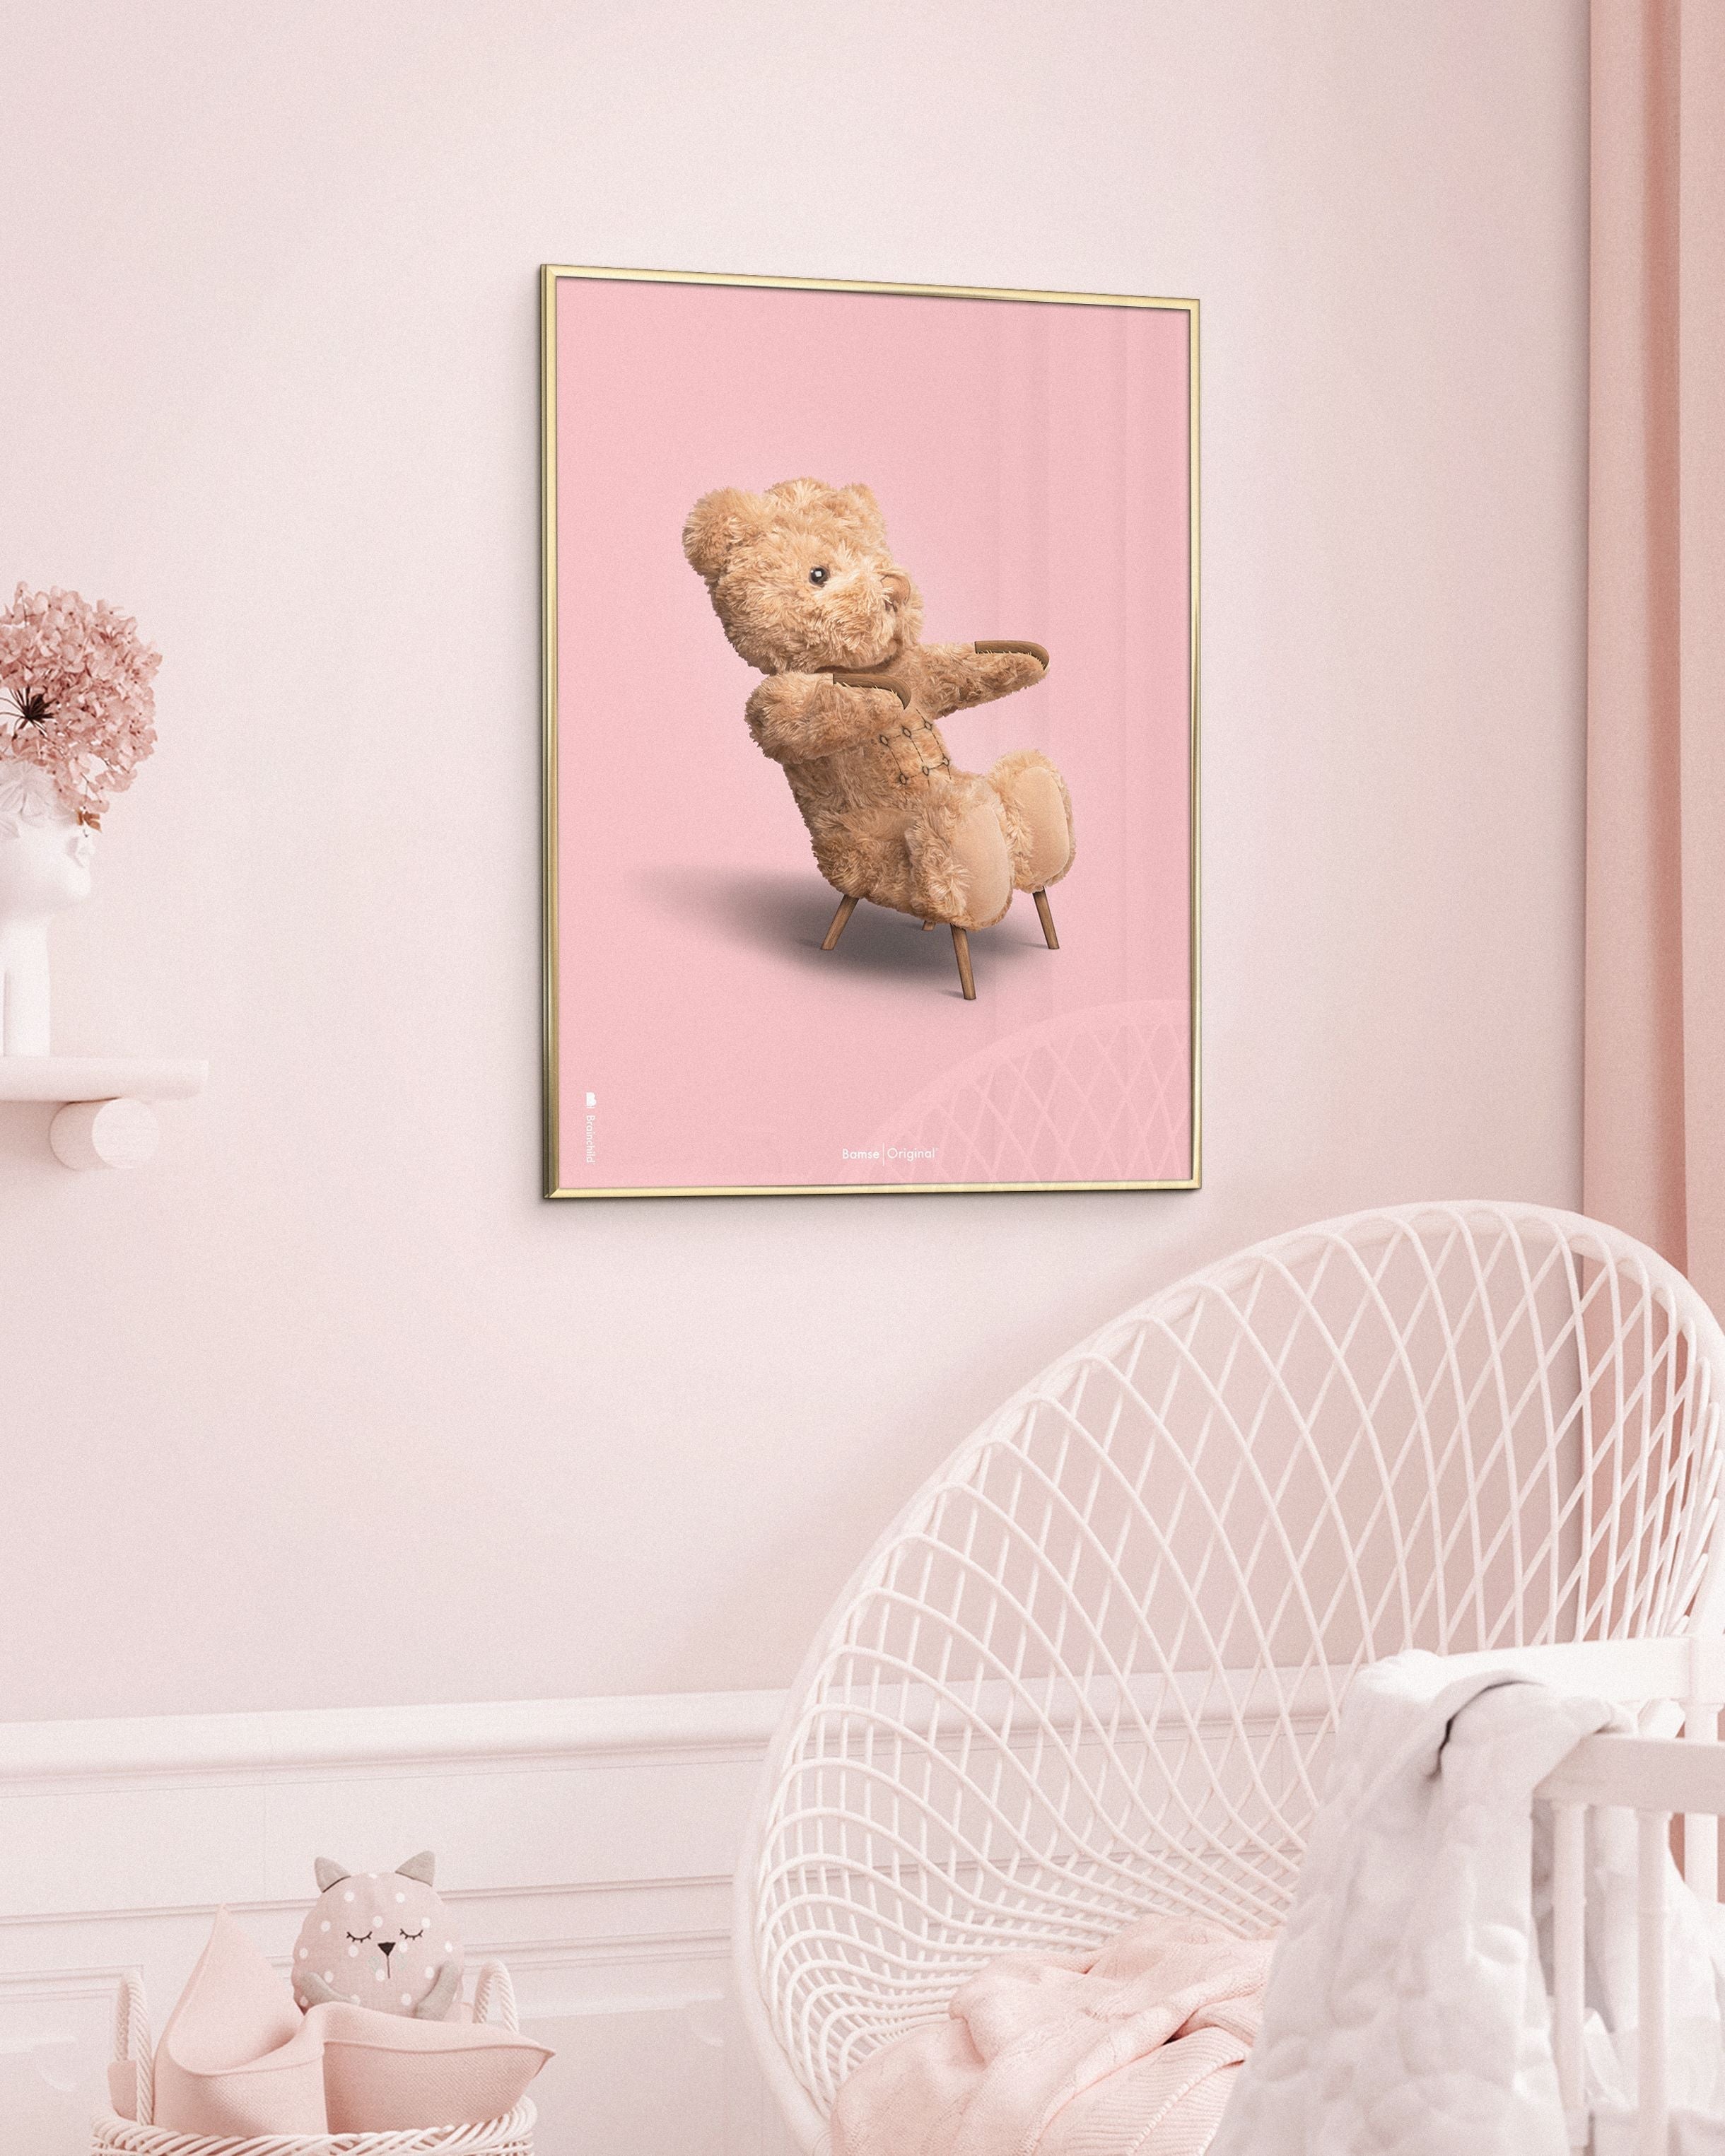 Brainchild Teddy Bear Classic Poster Without Frame 70x100 Cm, Pink Background